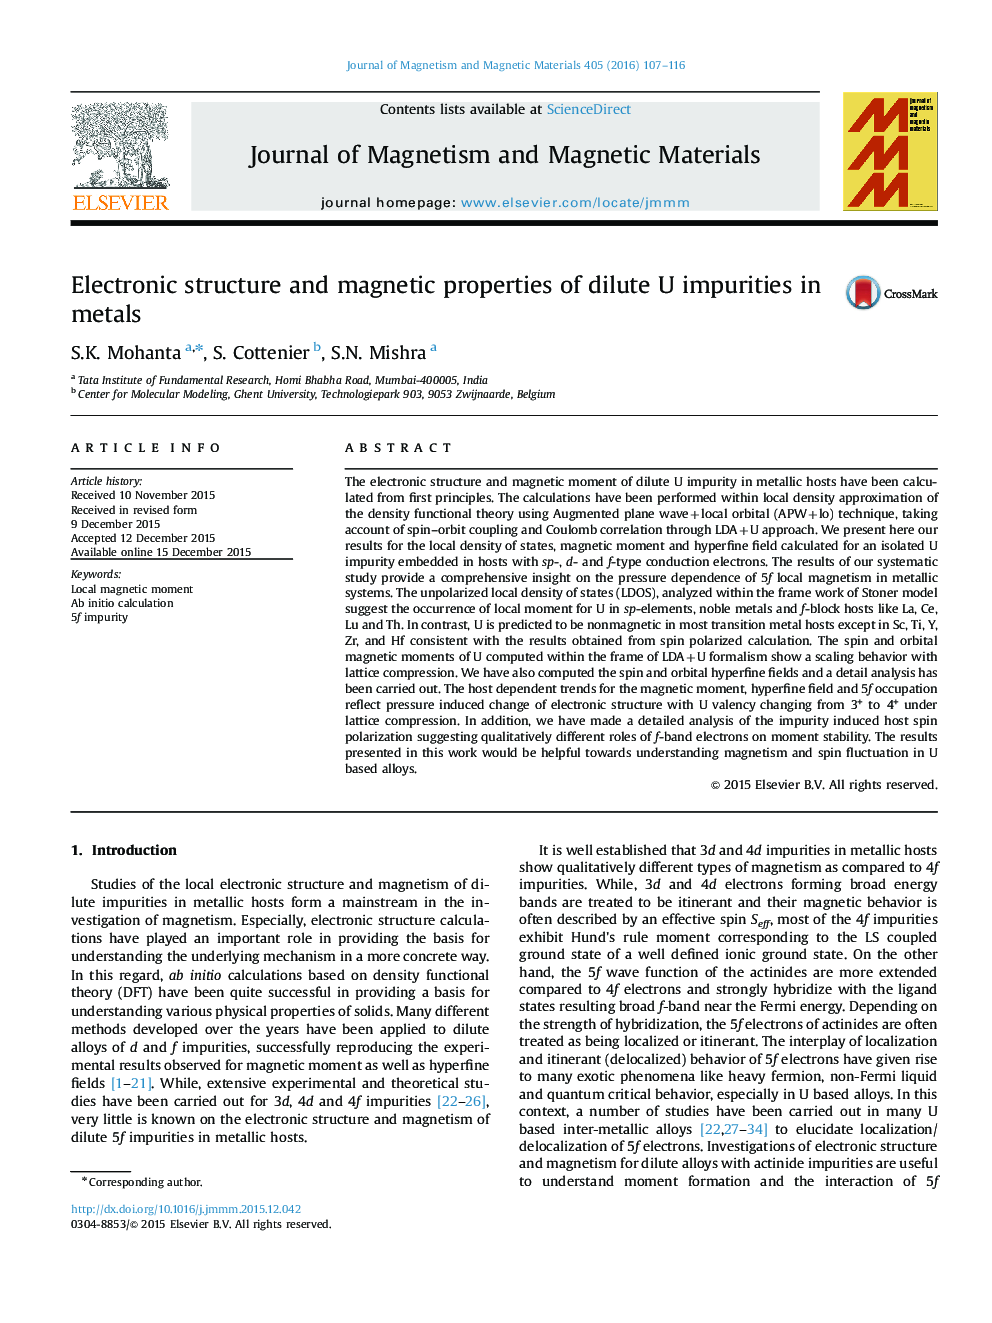 Electronic structure and magnetic properties of dilute U impurities in metals